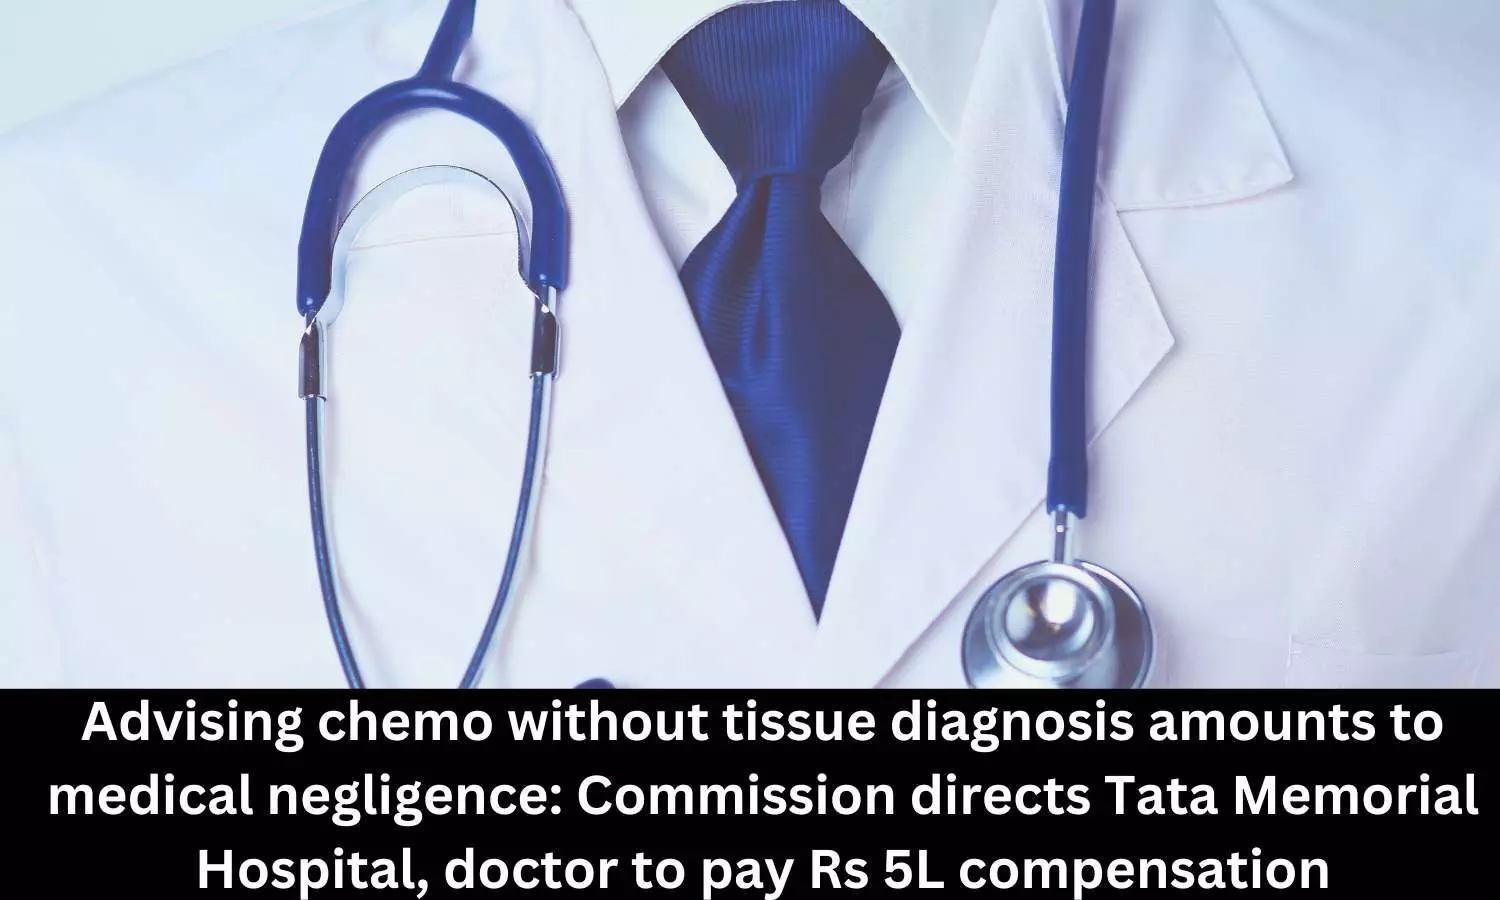 Advising chemo without tissue diagnosis: NCDRC holds Parels Tata Memorial Hospital, doctor guilty of medical negligence